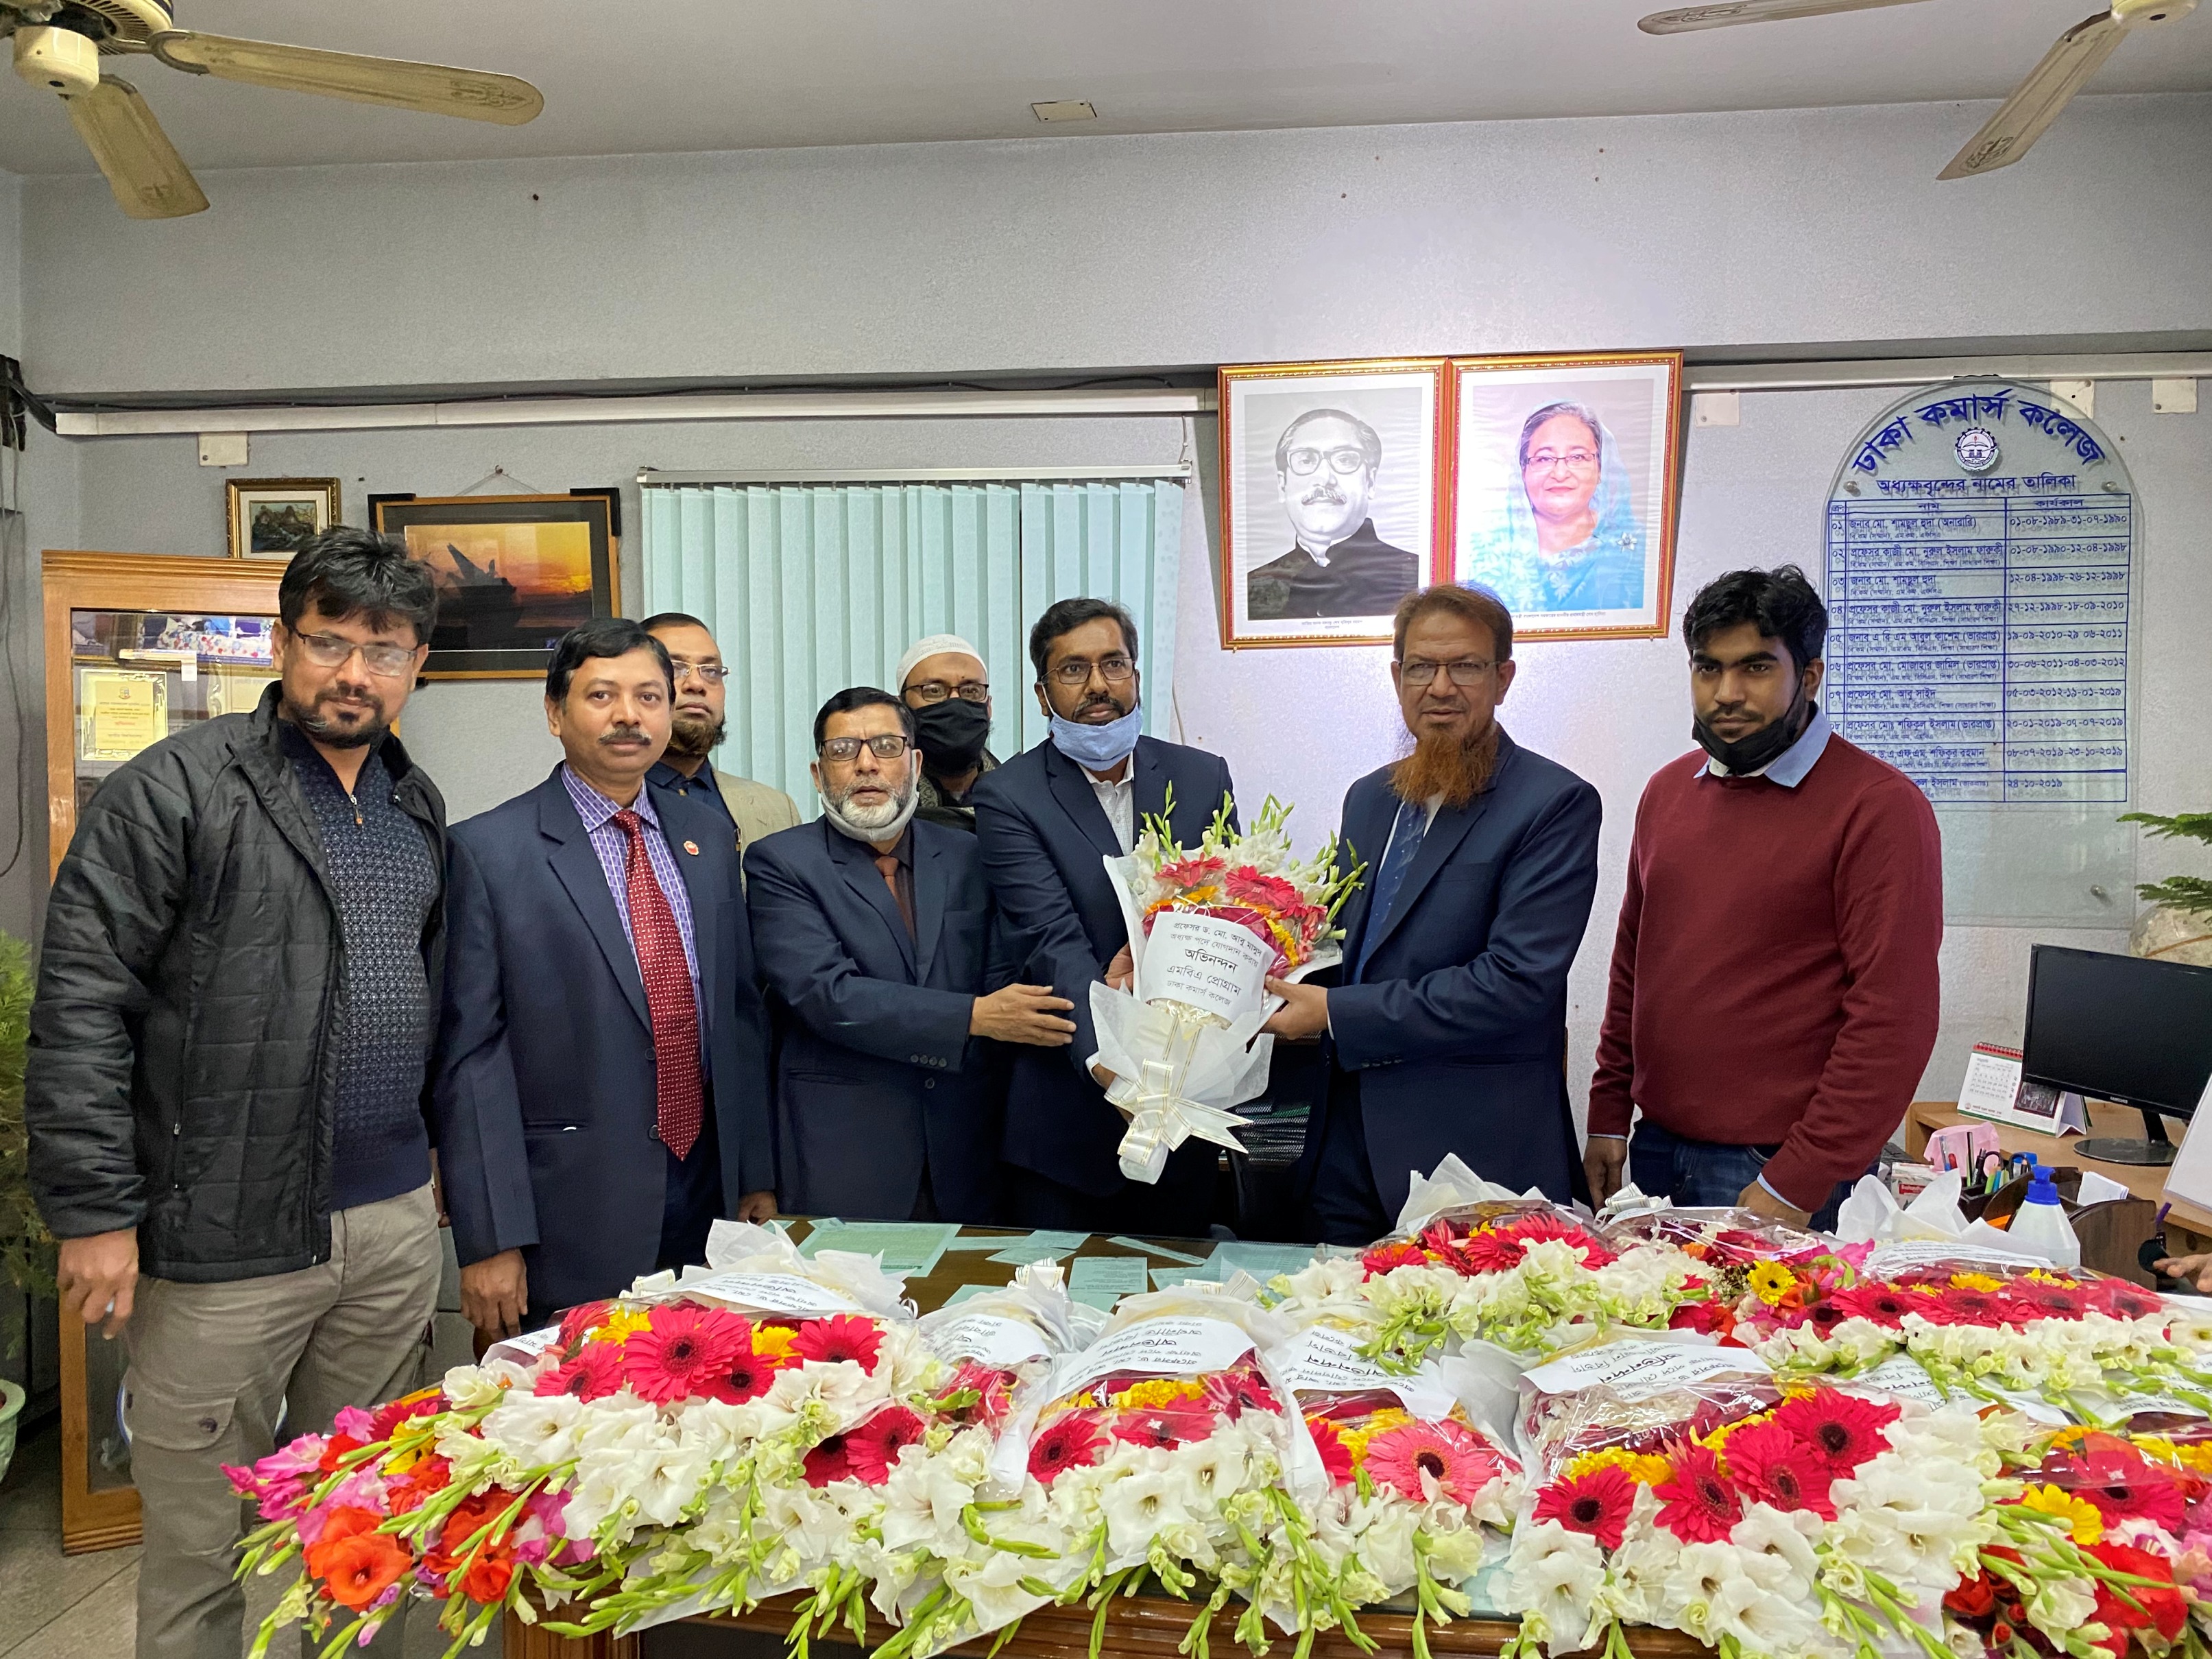 Reception to Principal Prof. Dr. Md. Abu Masud by MBA Program Department